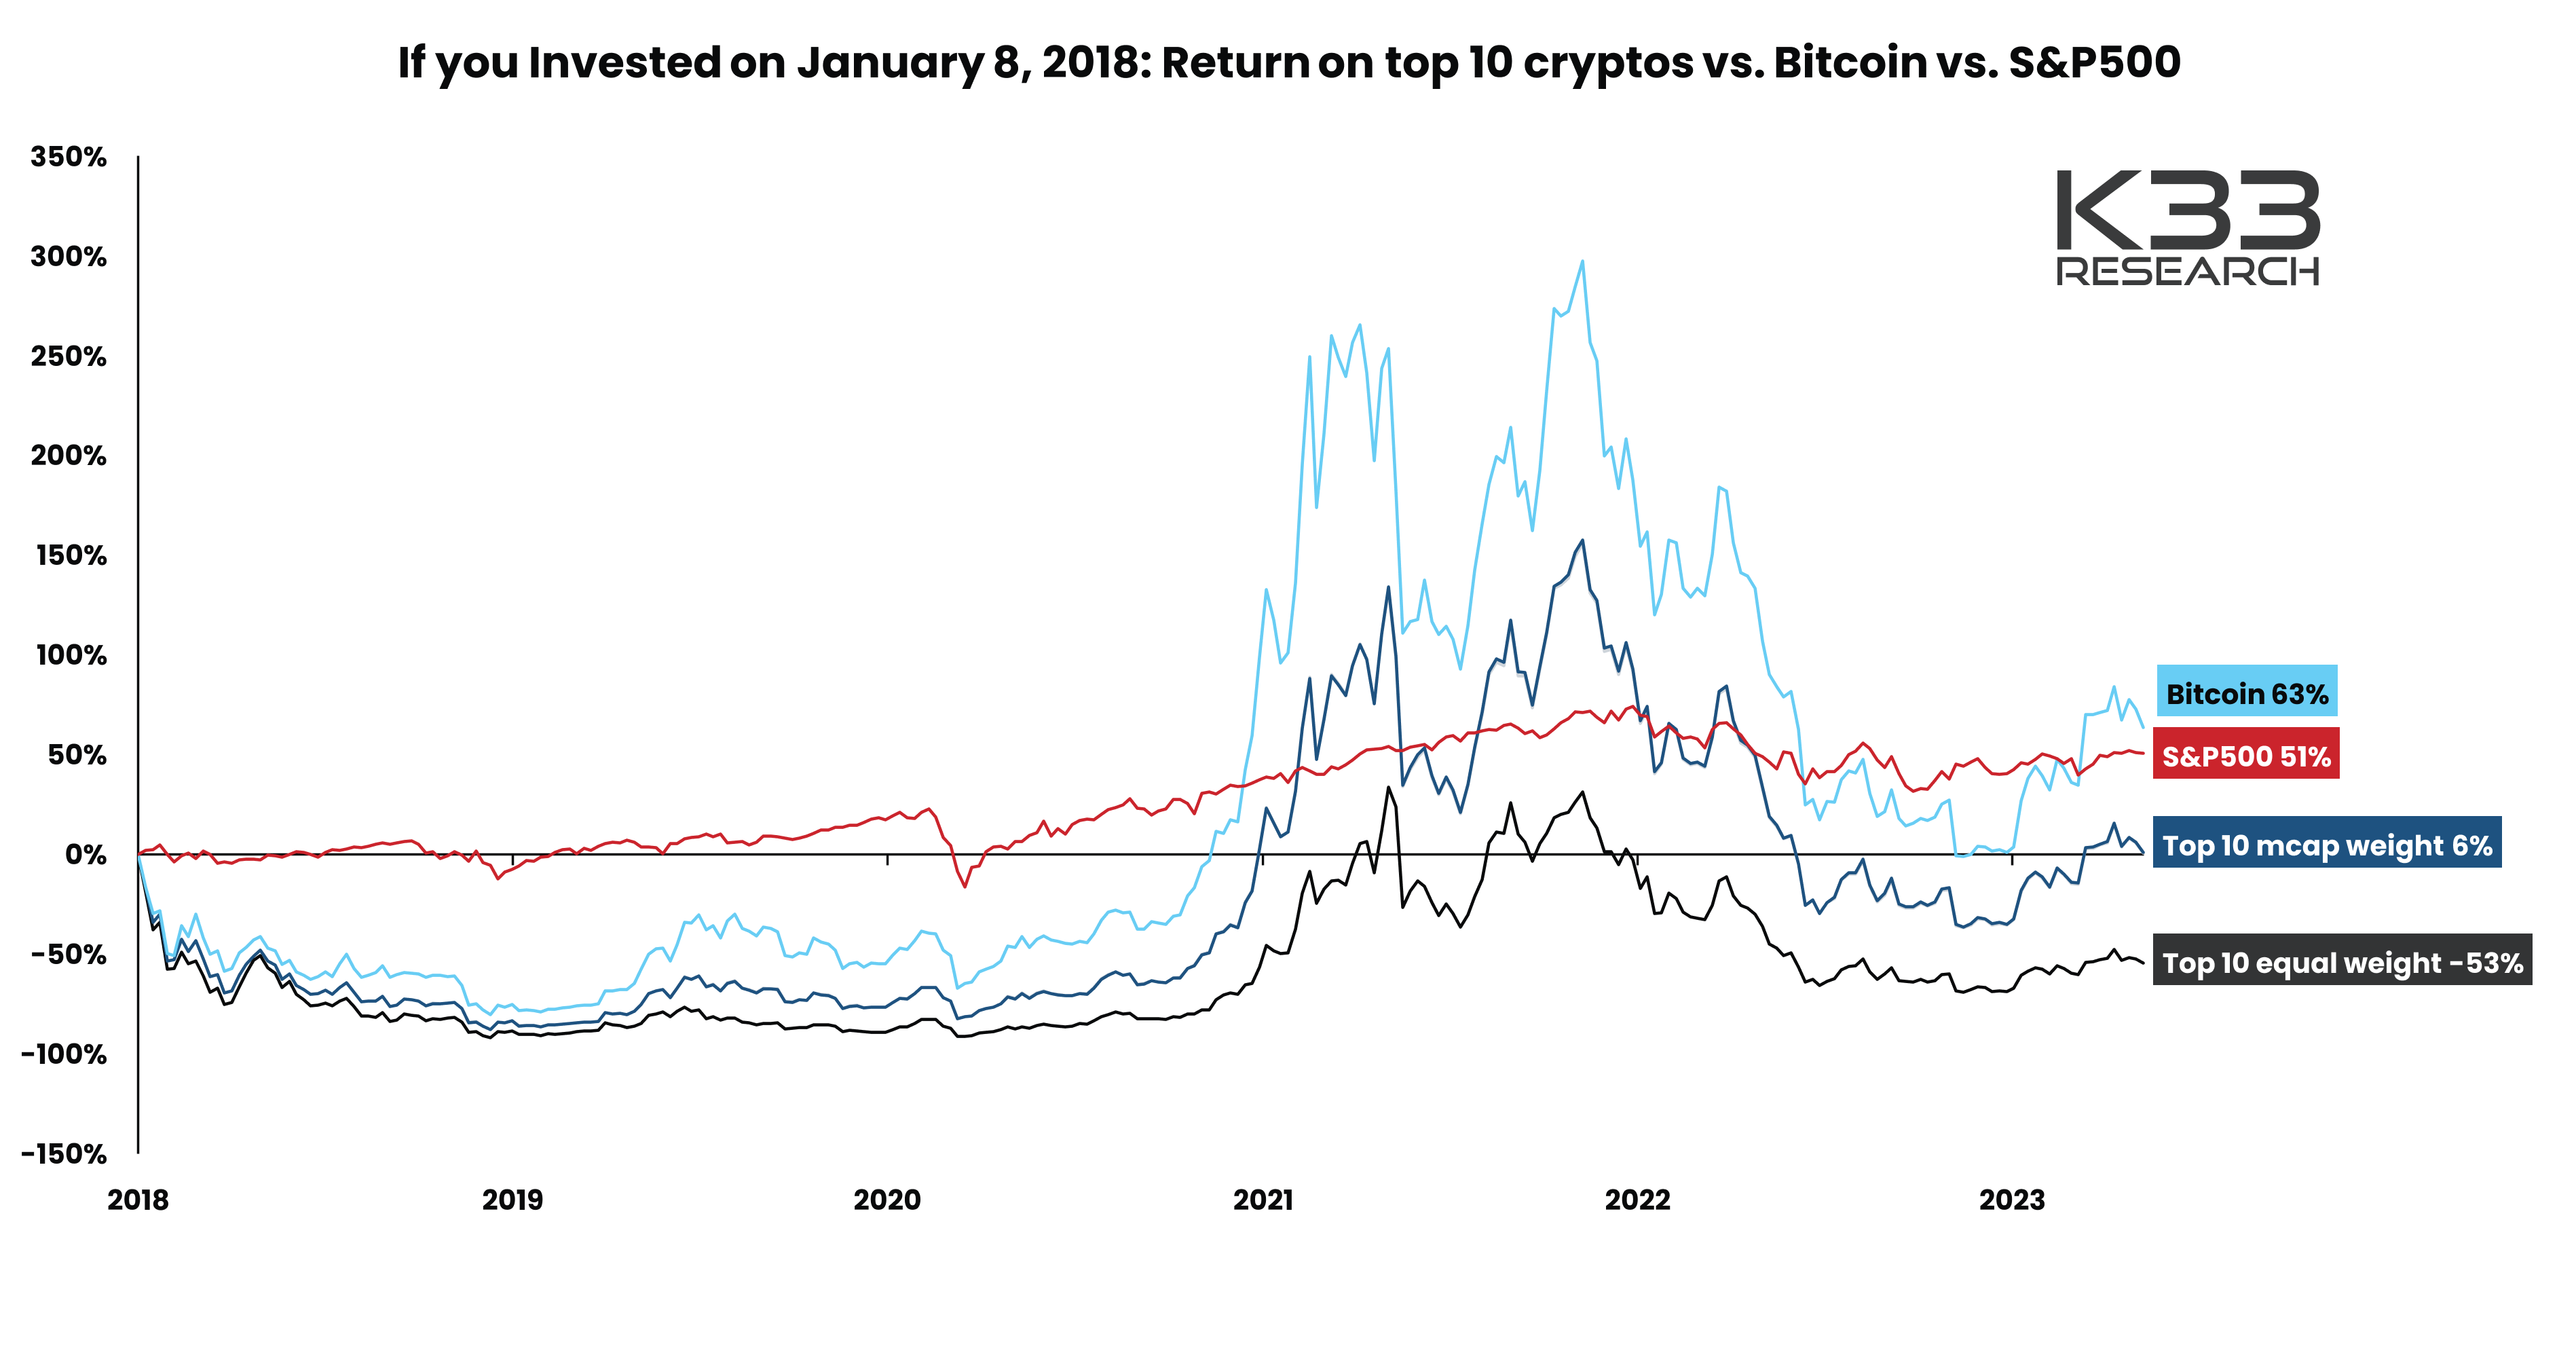 Historical chart of BTC vs S&P500 vs Altcoin returns from K33 research